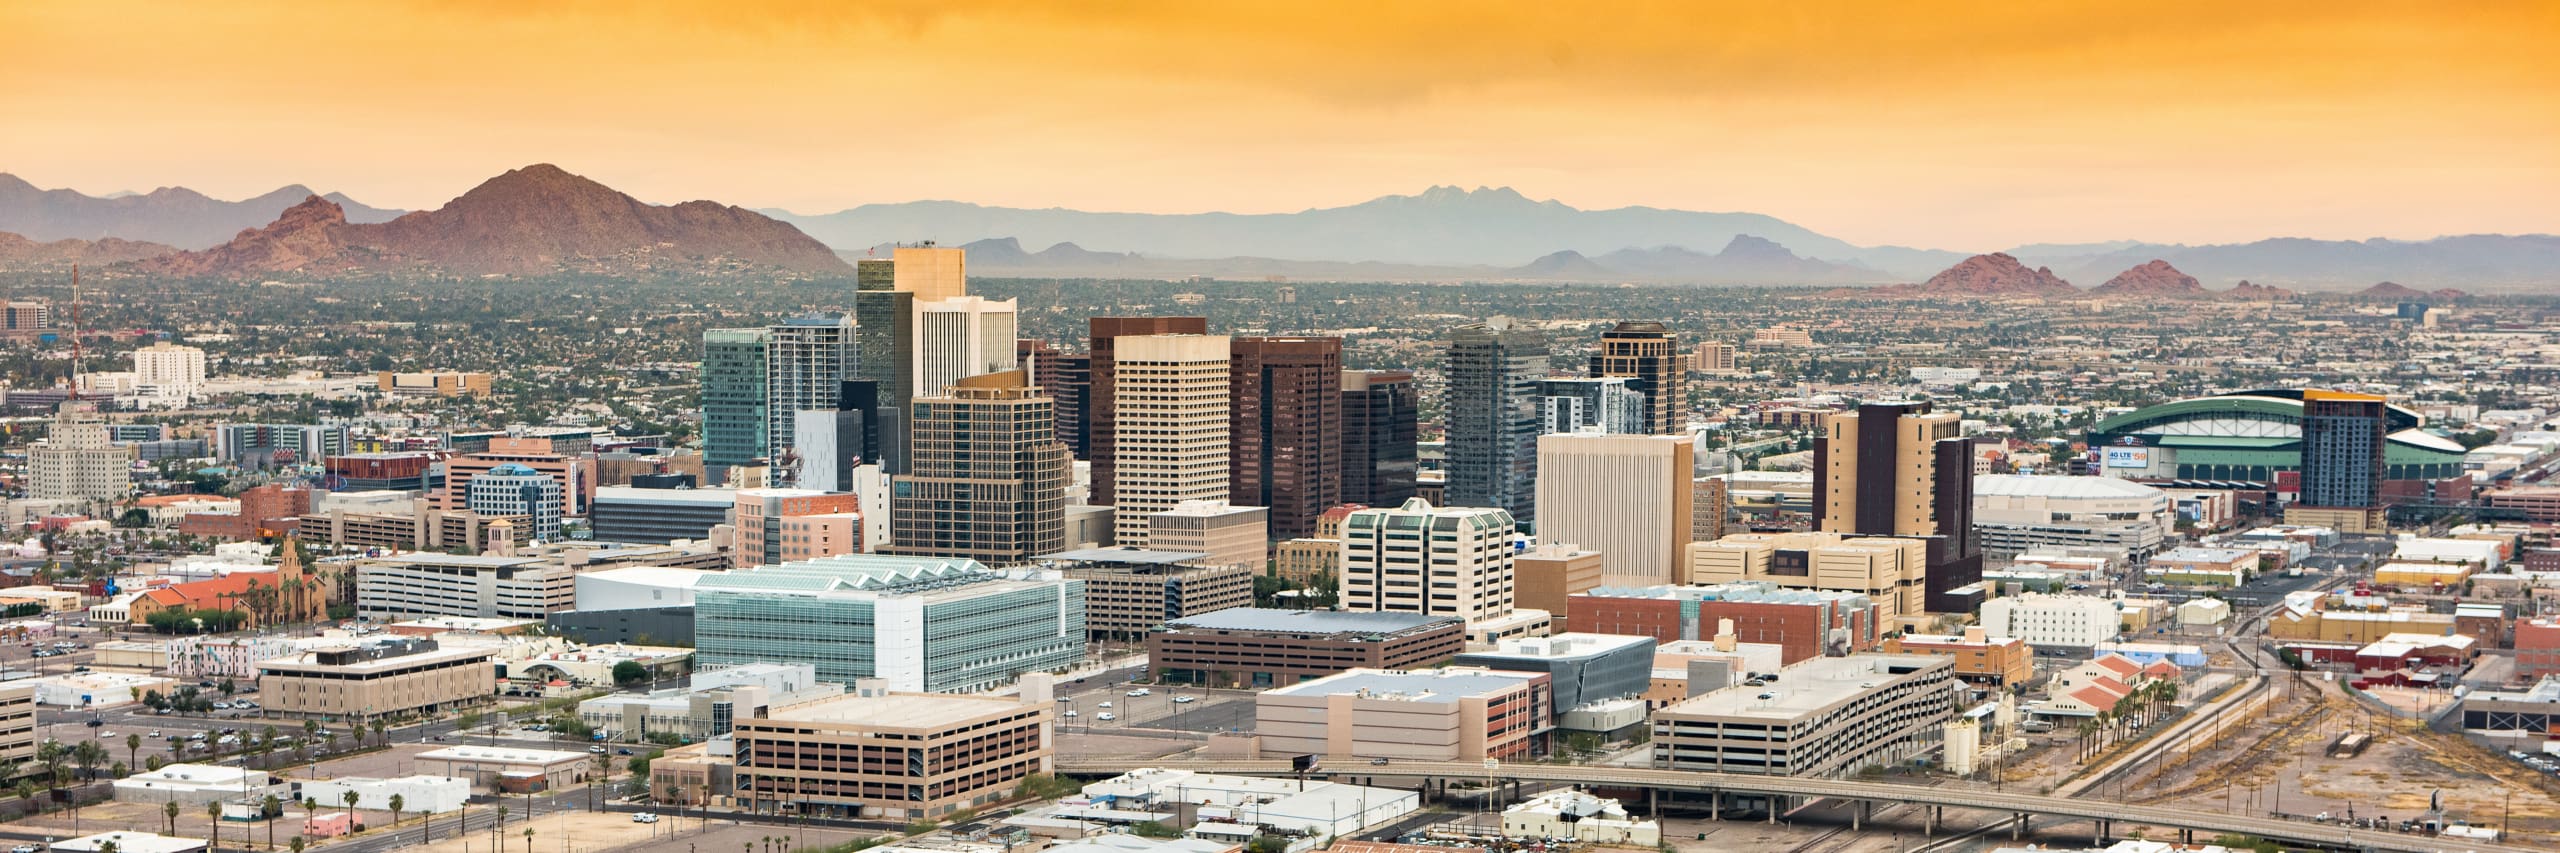 Phoenix cityscape with downtown skyline and mountain backdrop at sunset.